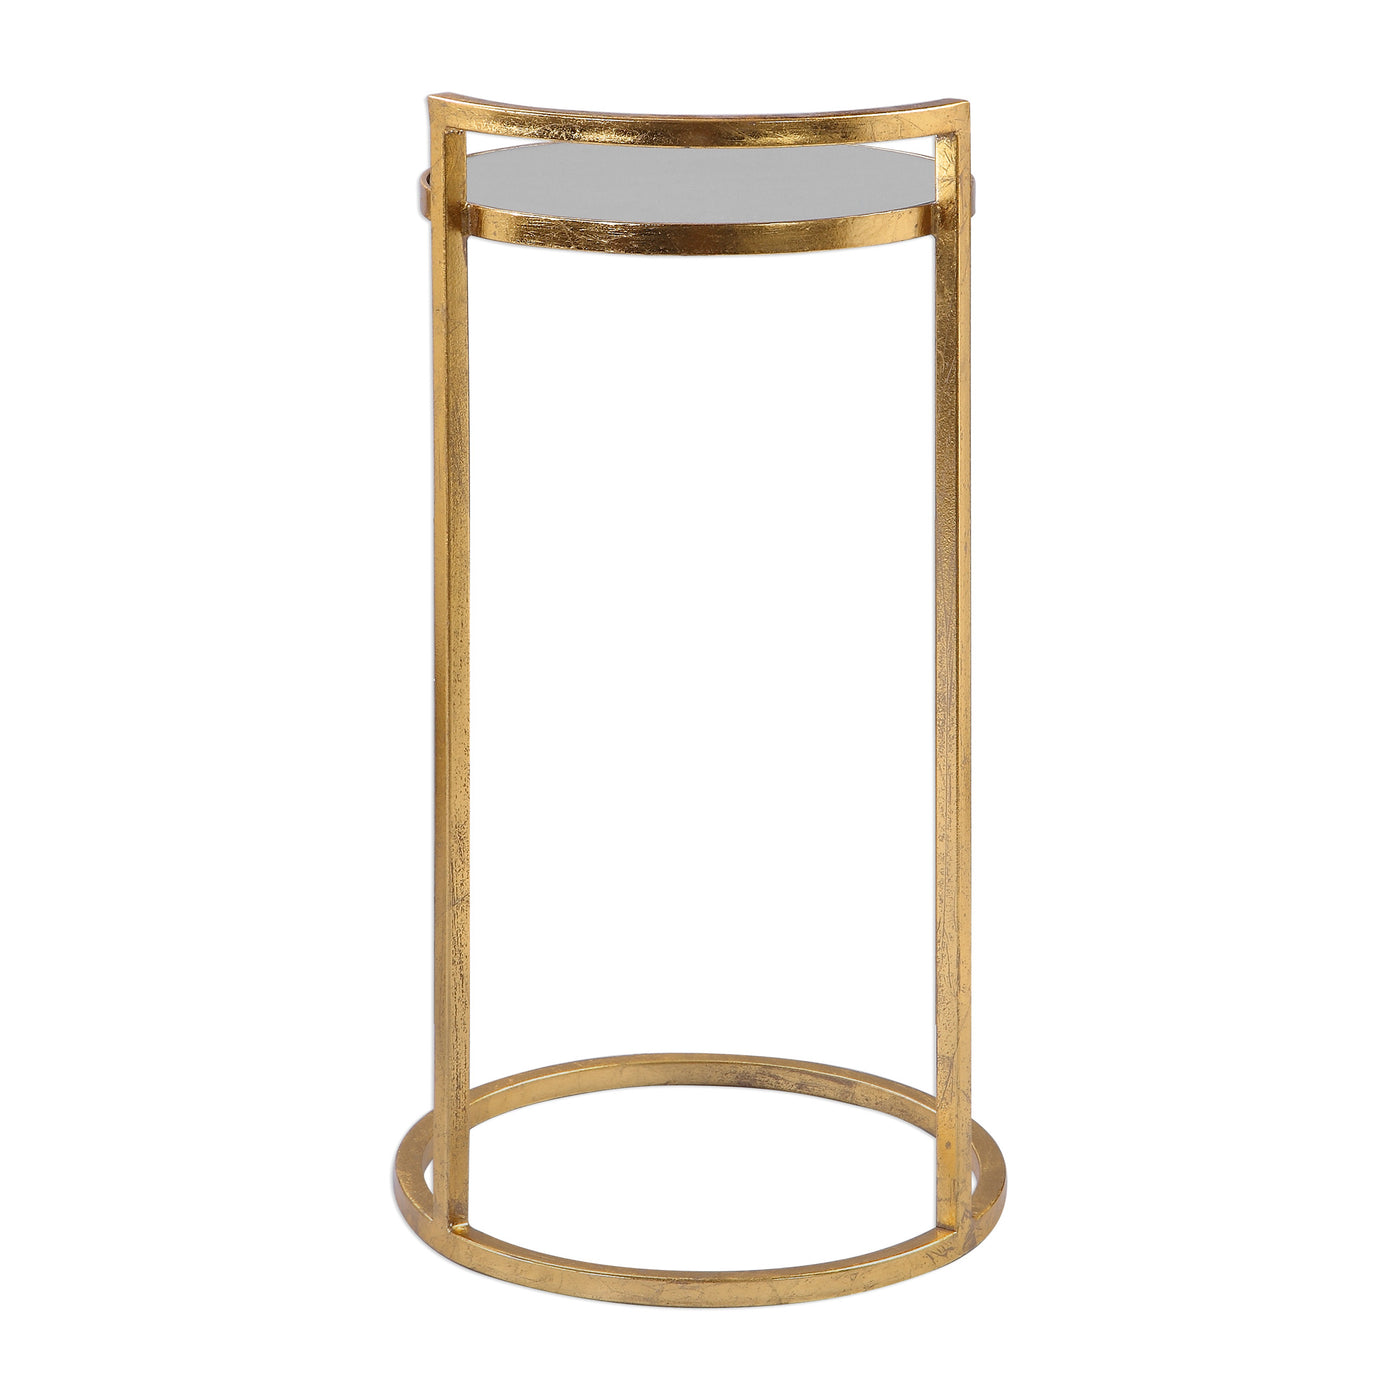 Solidly Constructed Of Hand Forged Iron, This Accent Table Is Finished In A Bright Gold Leaf, Complete With A Mirrored Top.